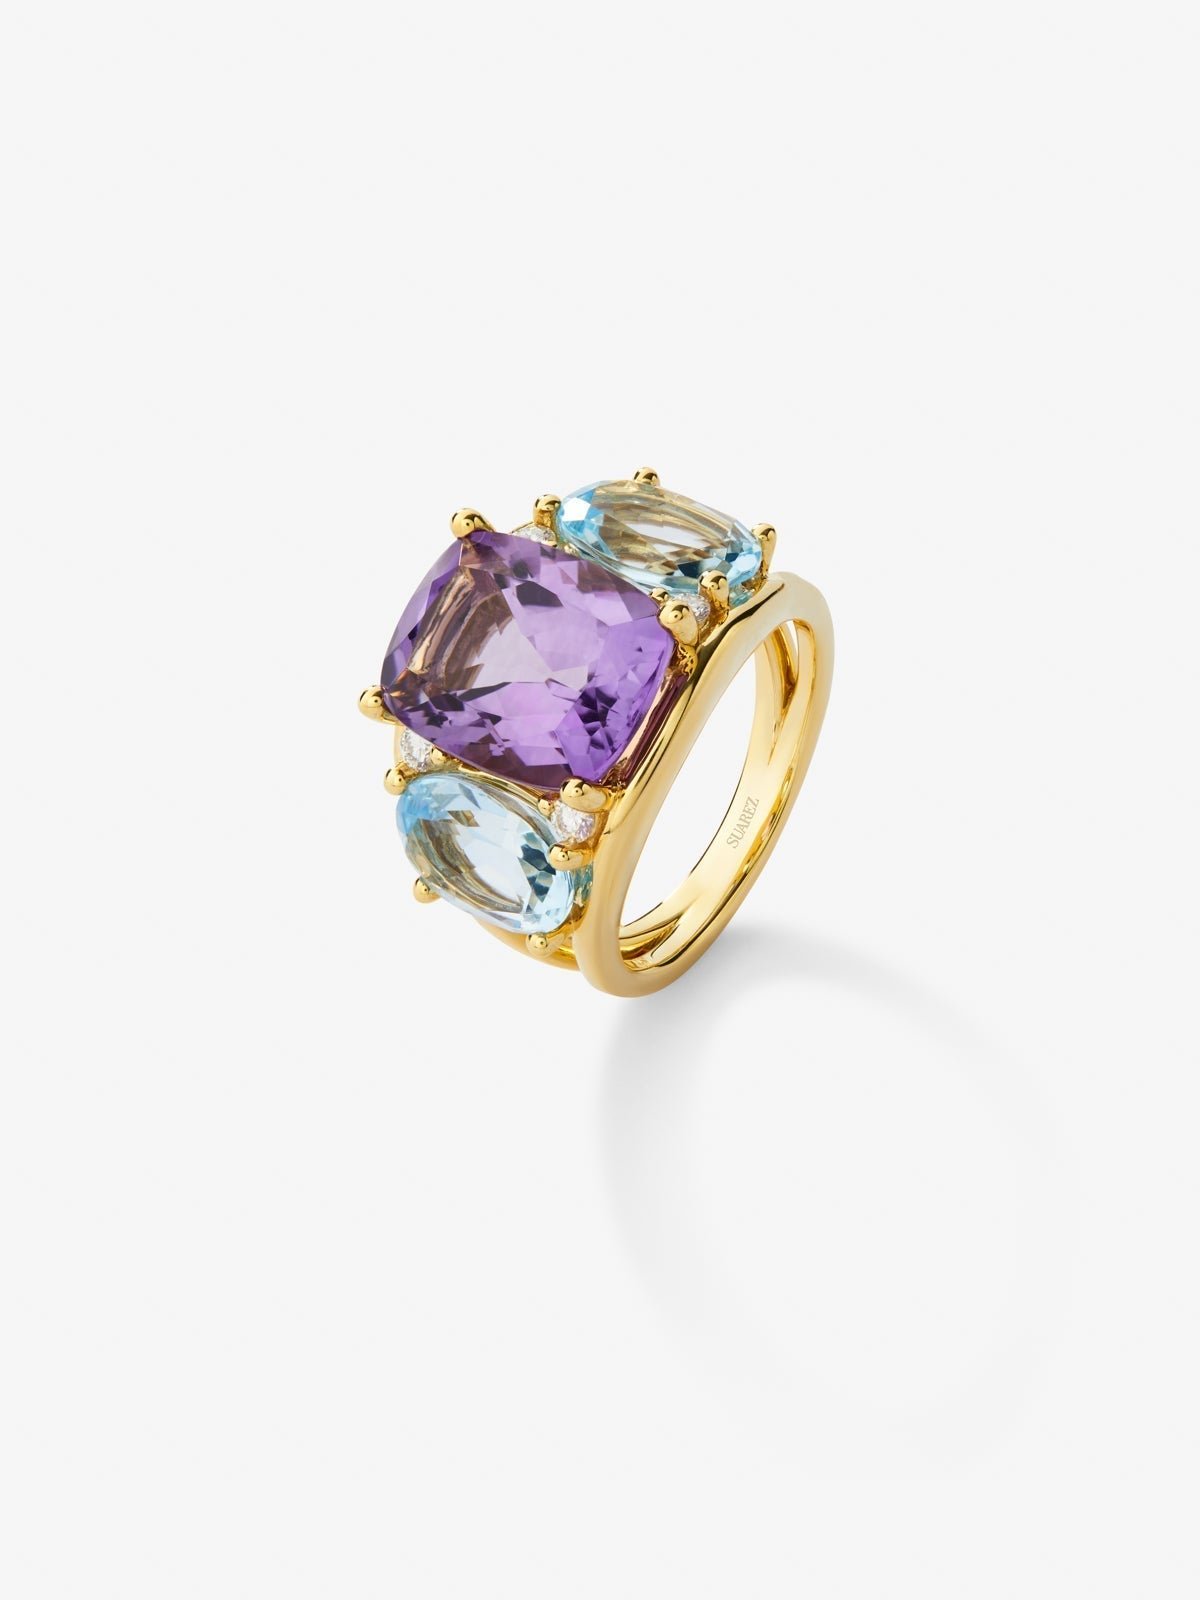 18K yellow gold ring with cushion-cut purple amethyst of 5.5 cts, 2 oval-cut sky blue topazes with a total of 4.65 cts and 4 brilliant-cut diamonds with a total of 0.15 cts